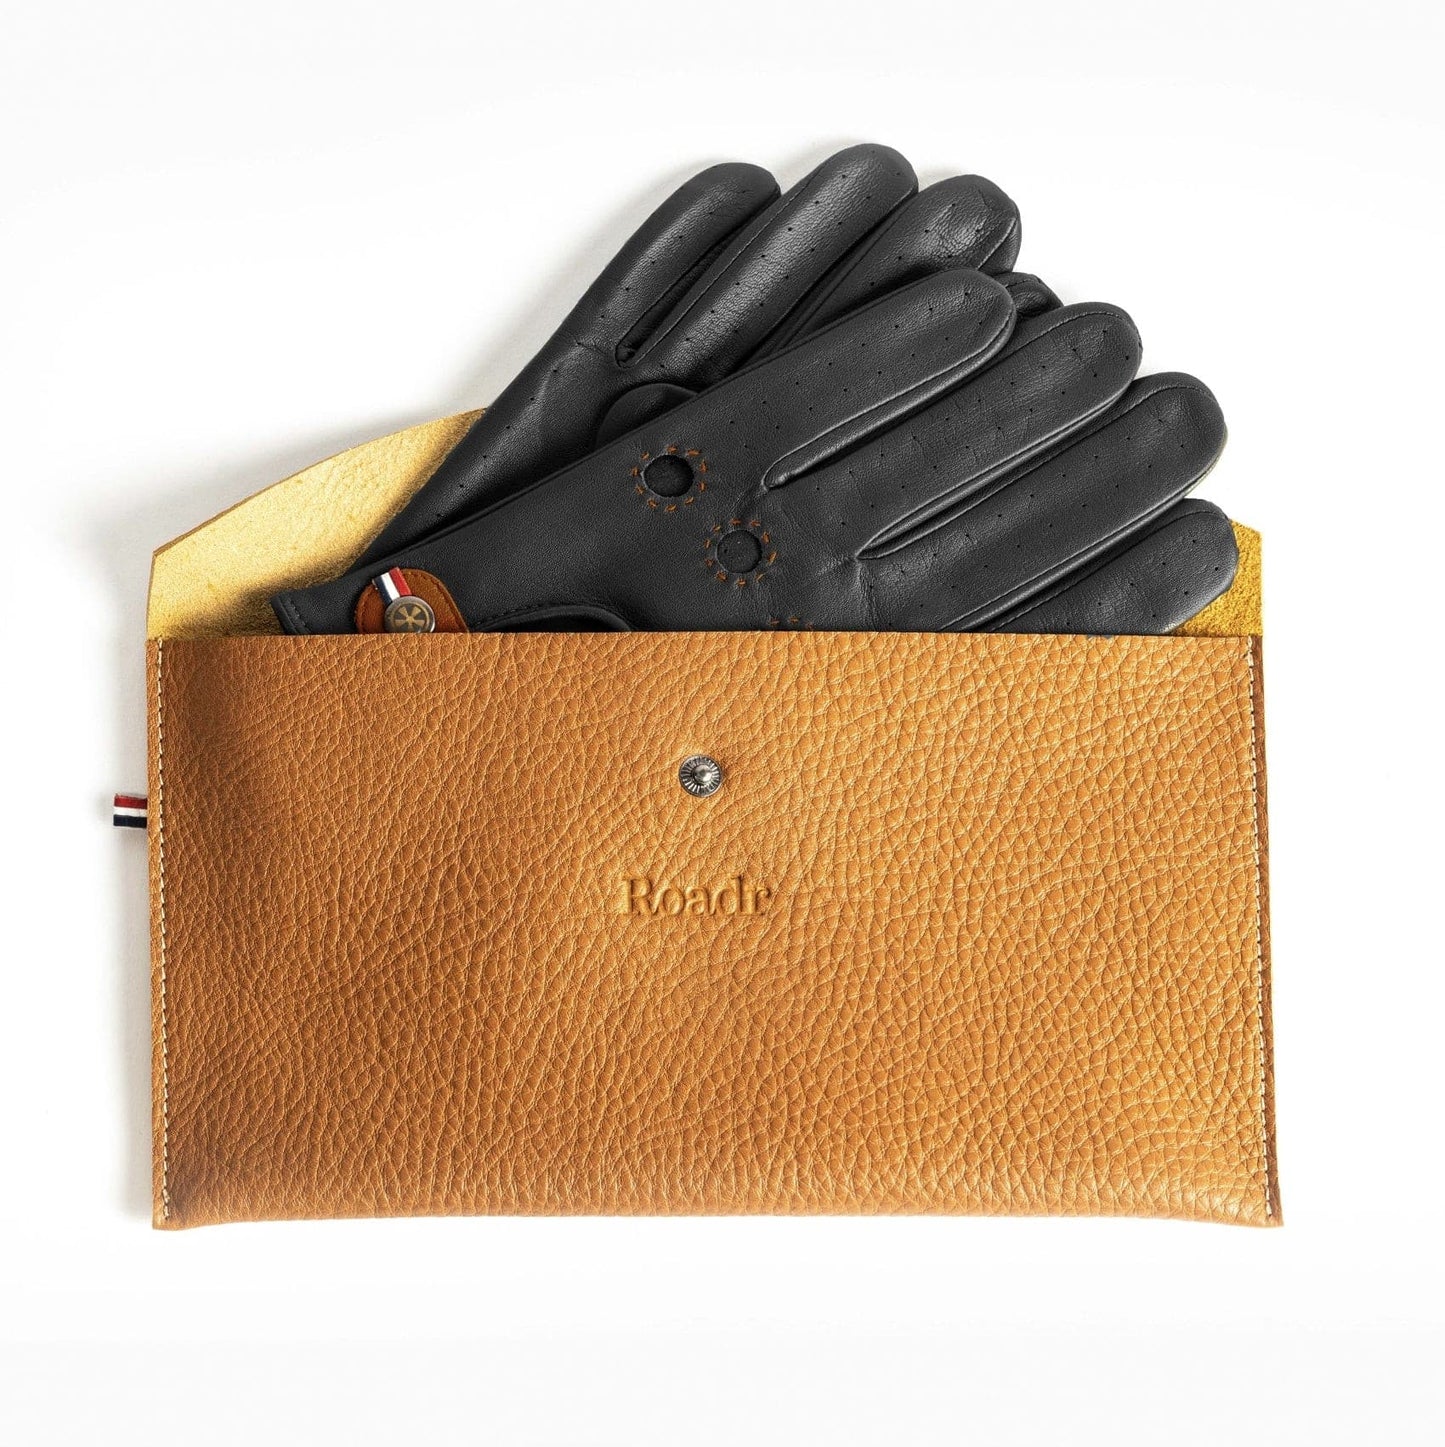 Classic black leather driving gloves sleeve